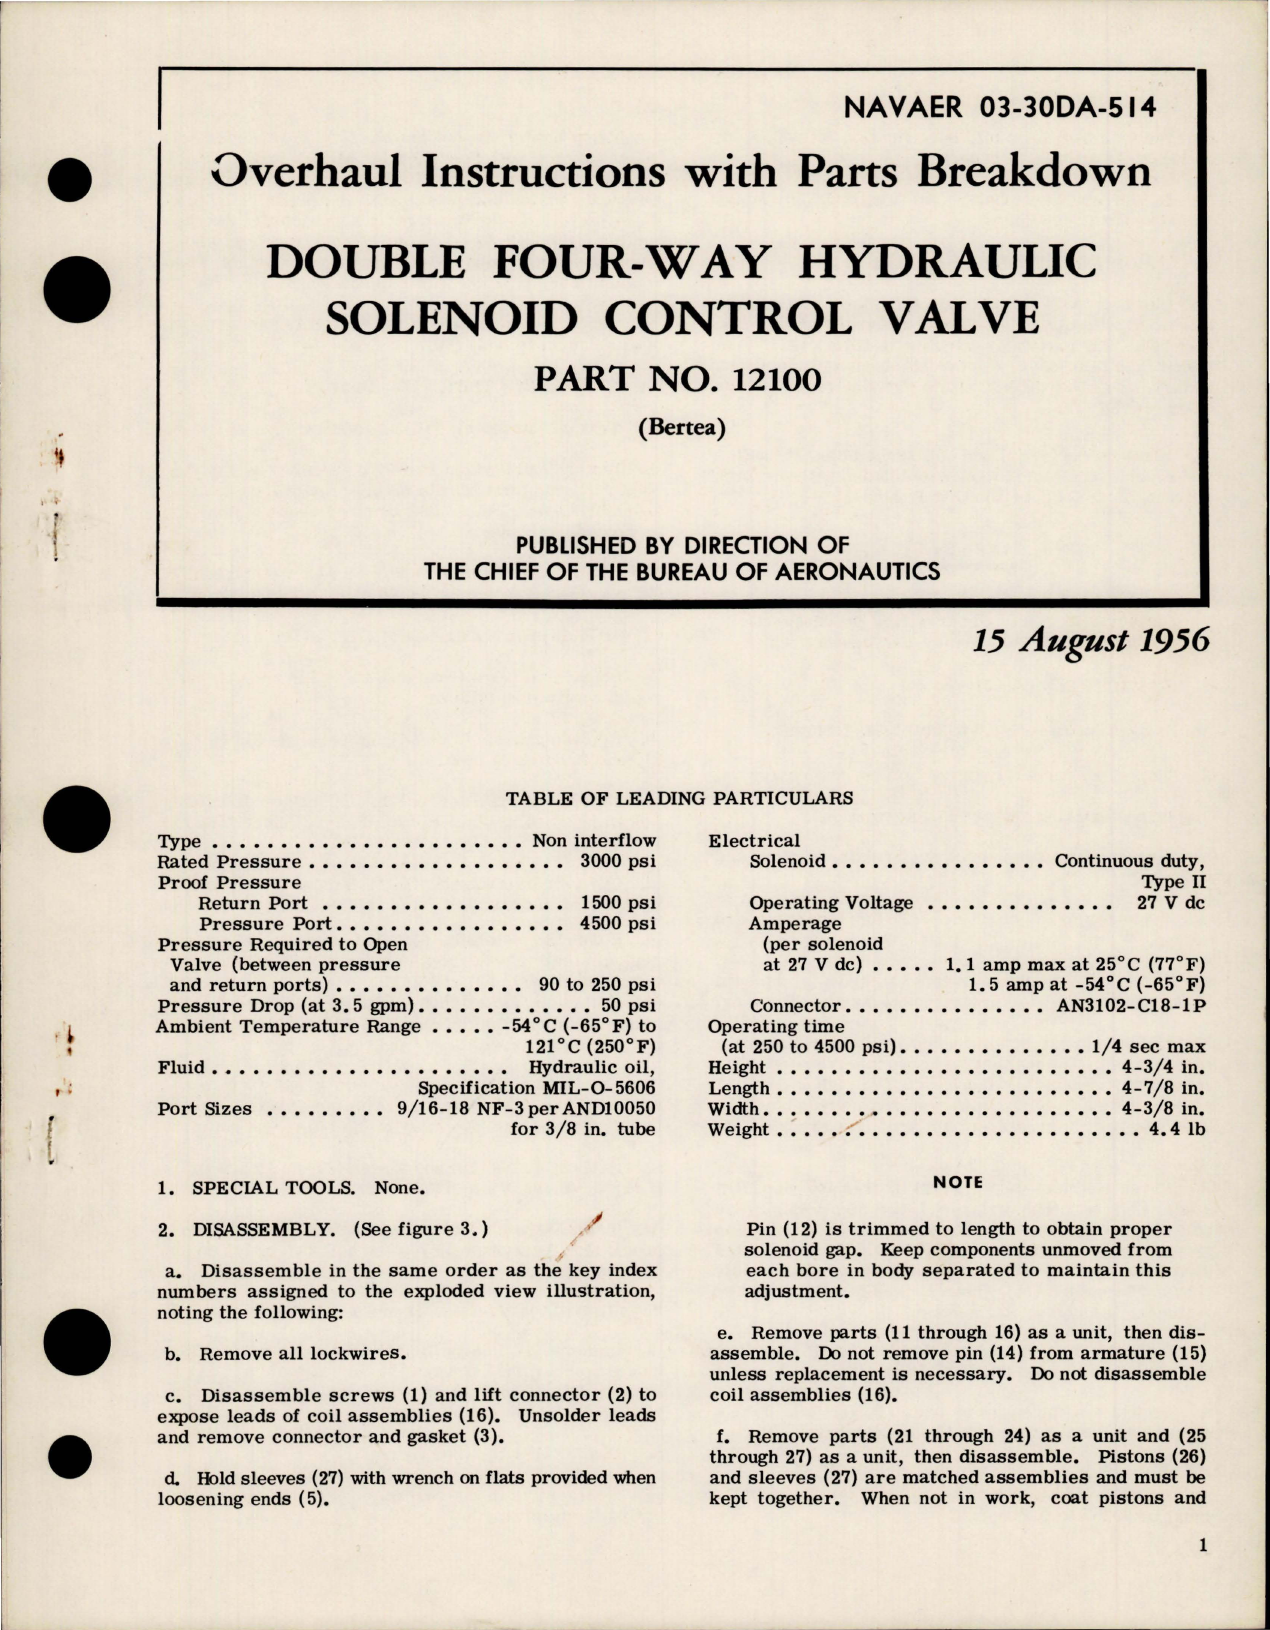 Sample page 1 from AirCorps Library document: Overhaul Instructions with Parts for Double Four-Way Hydraulic Solenoid Control Valve - Part 12100 